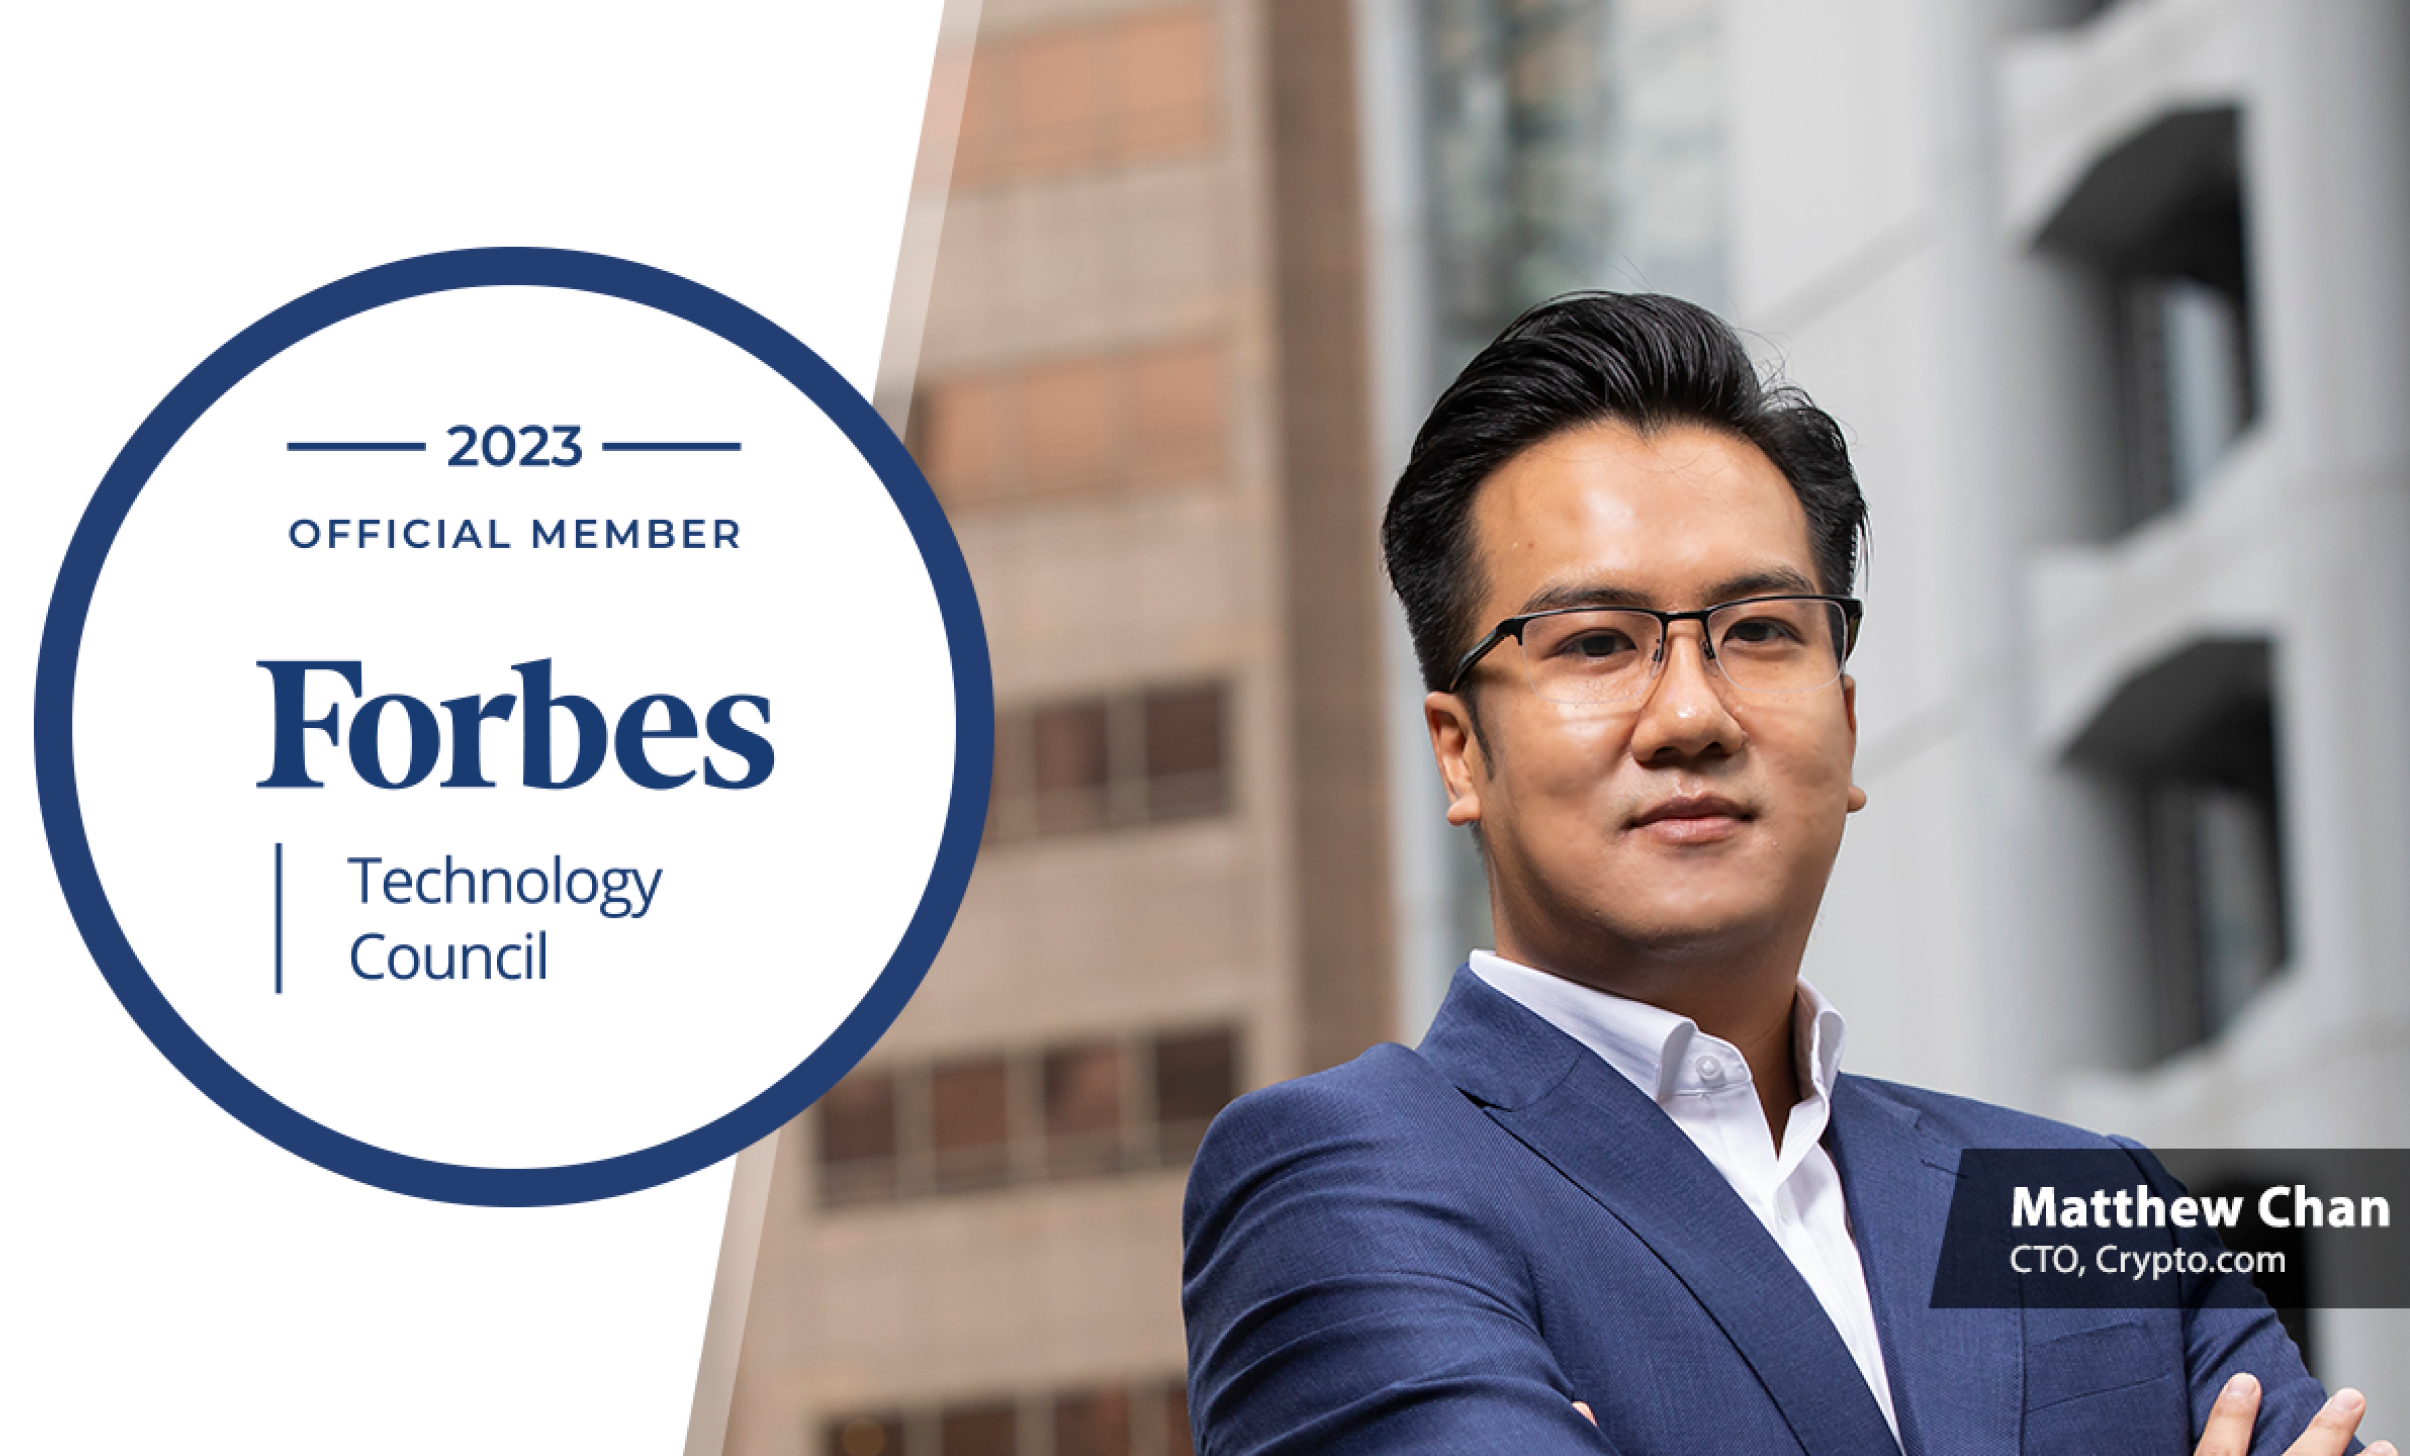 Matthew Chan 2023 Official Member of the Forbes Technology Council